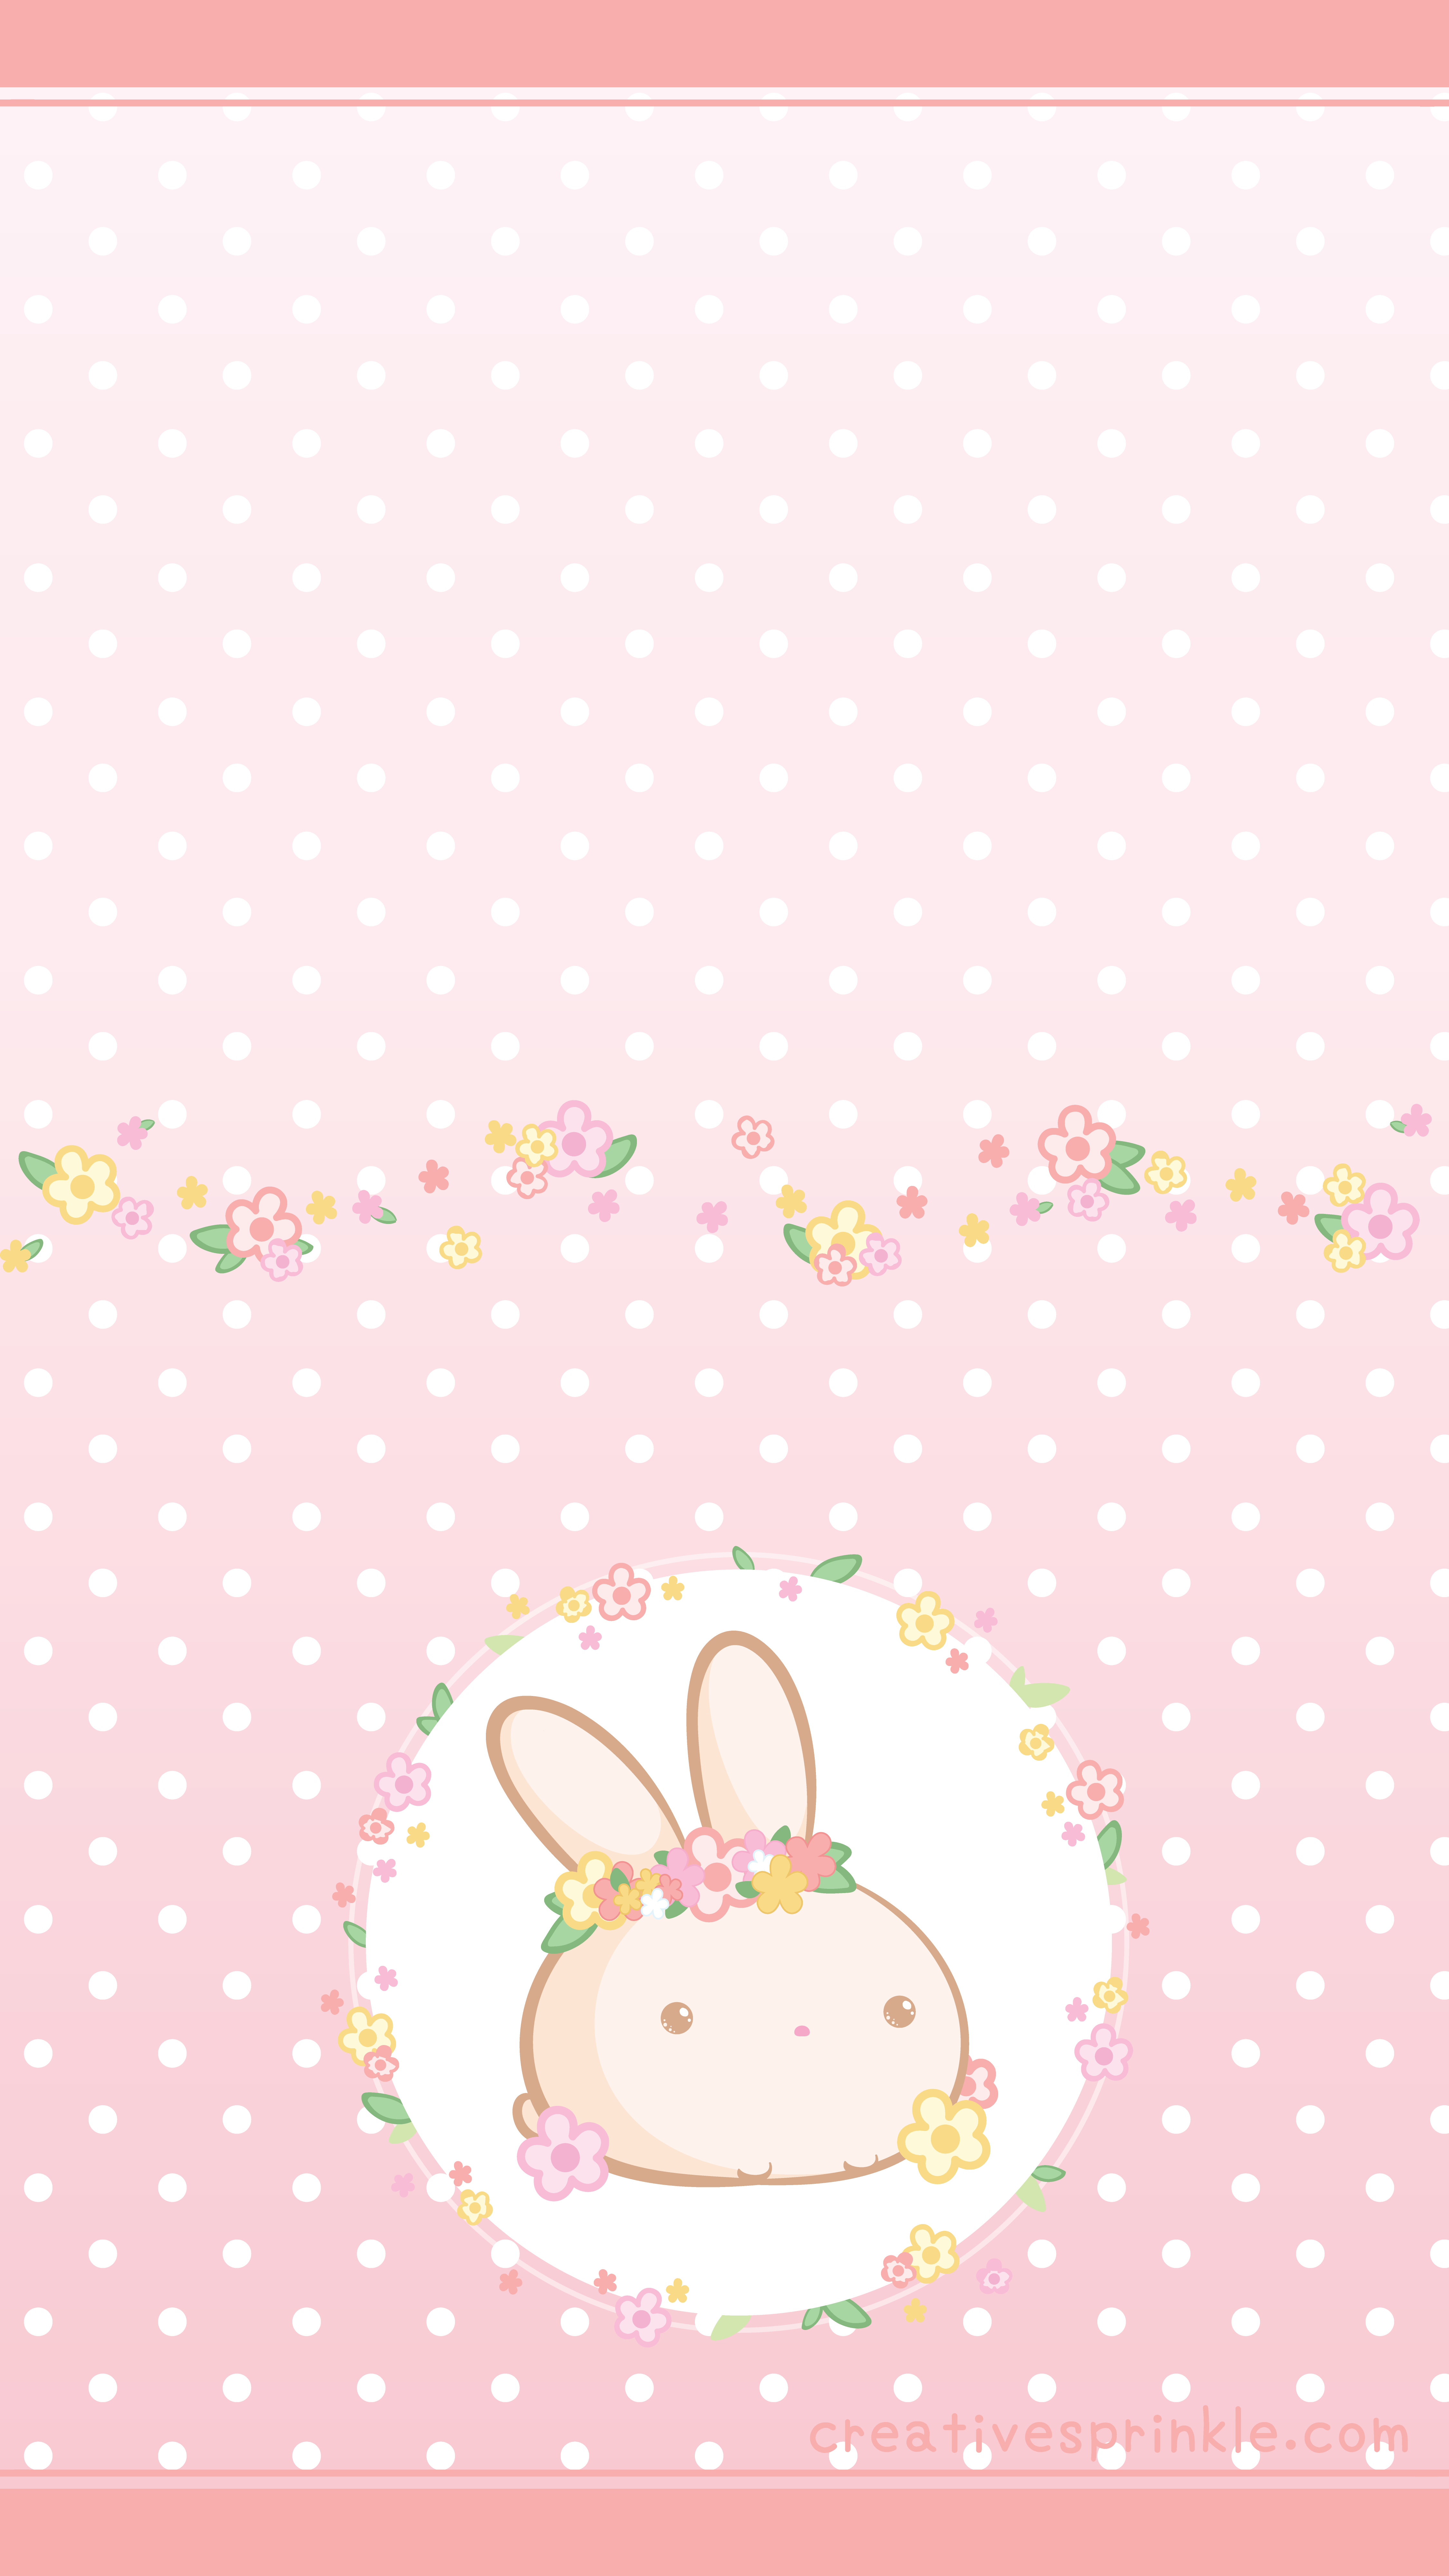 Kawaii Brown Baby Bunny With Floral Wreaths Pink Wallpaper